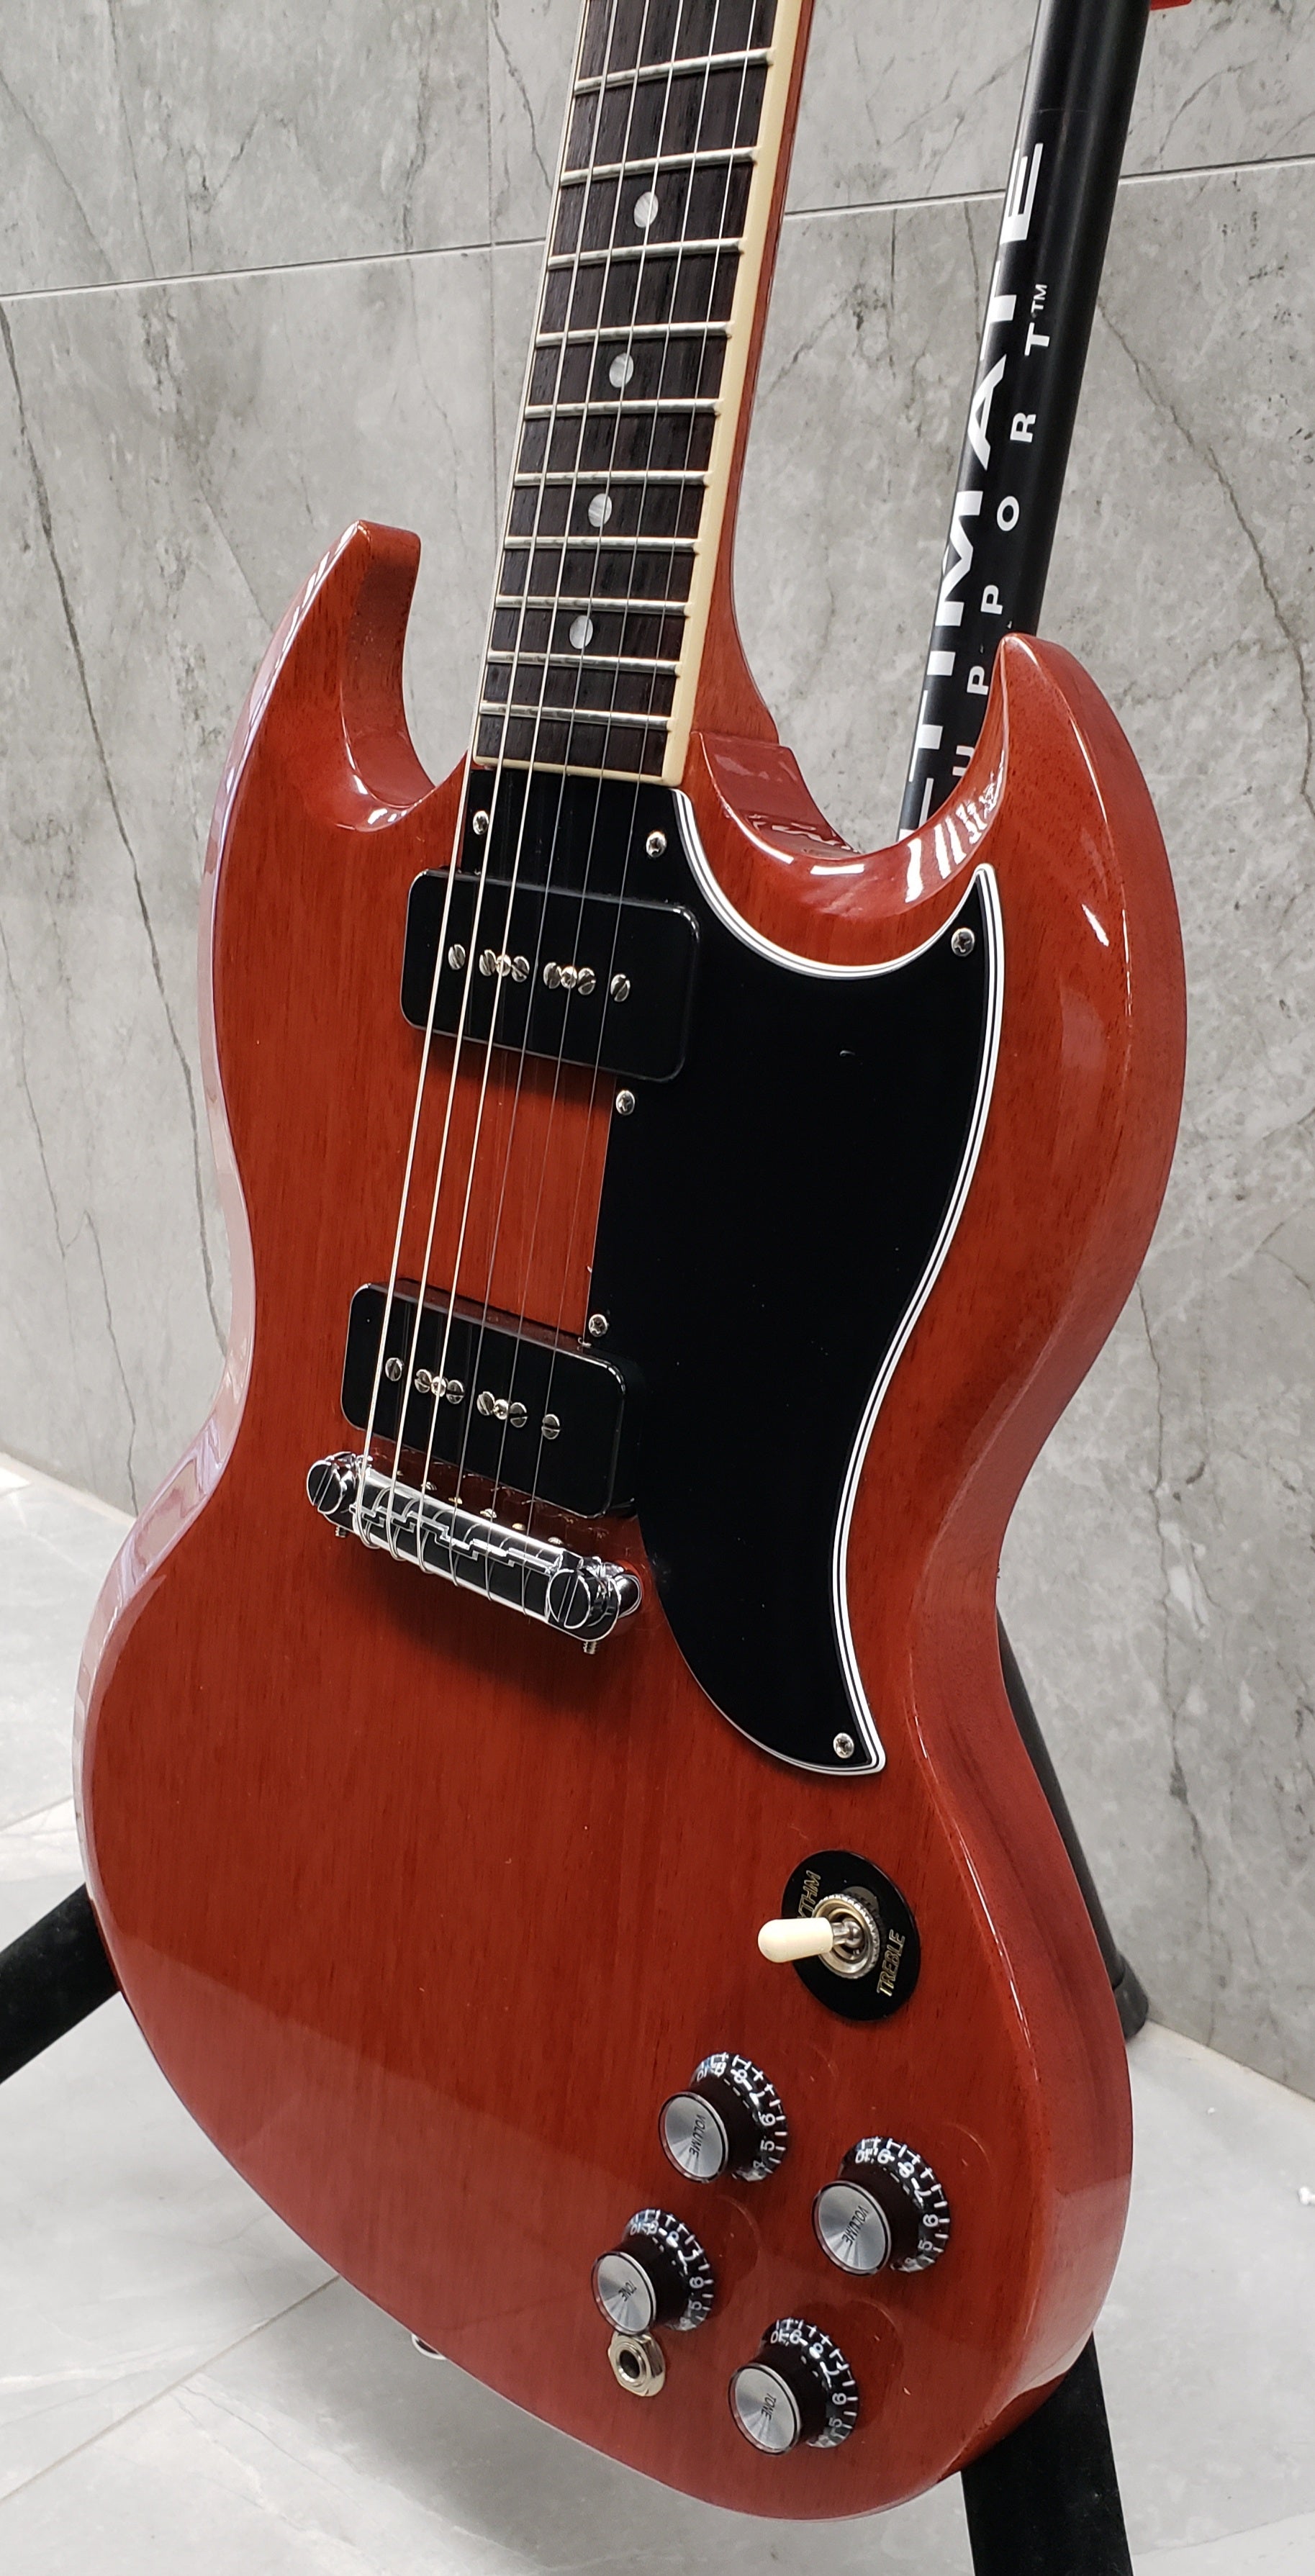 Gibson SG Special P90 - Vintage Cherry SGSP00VCCH